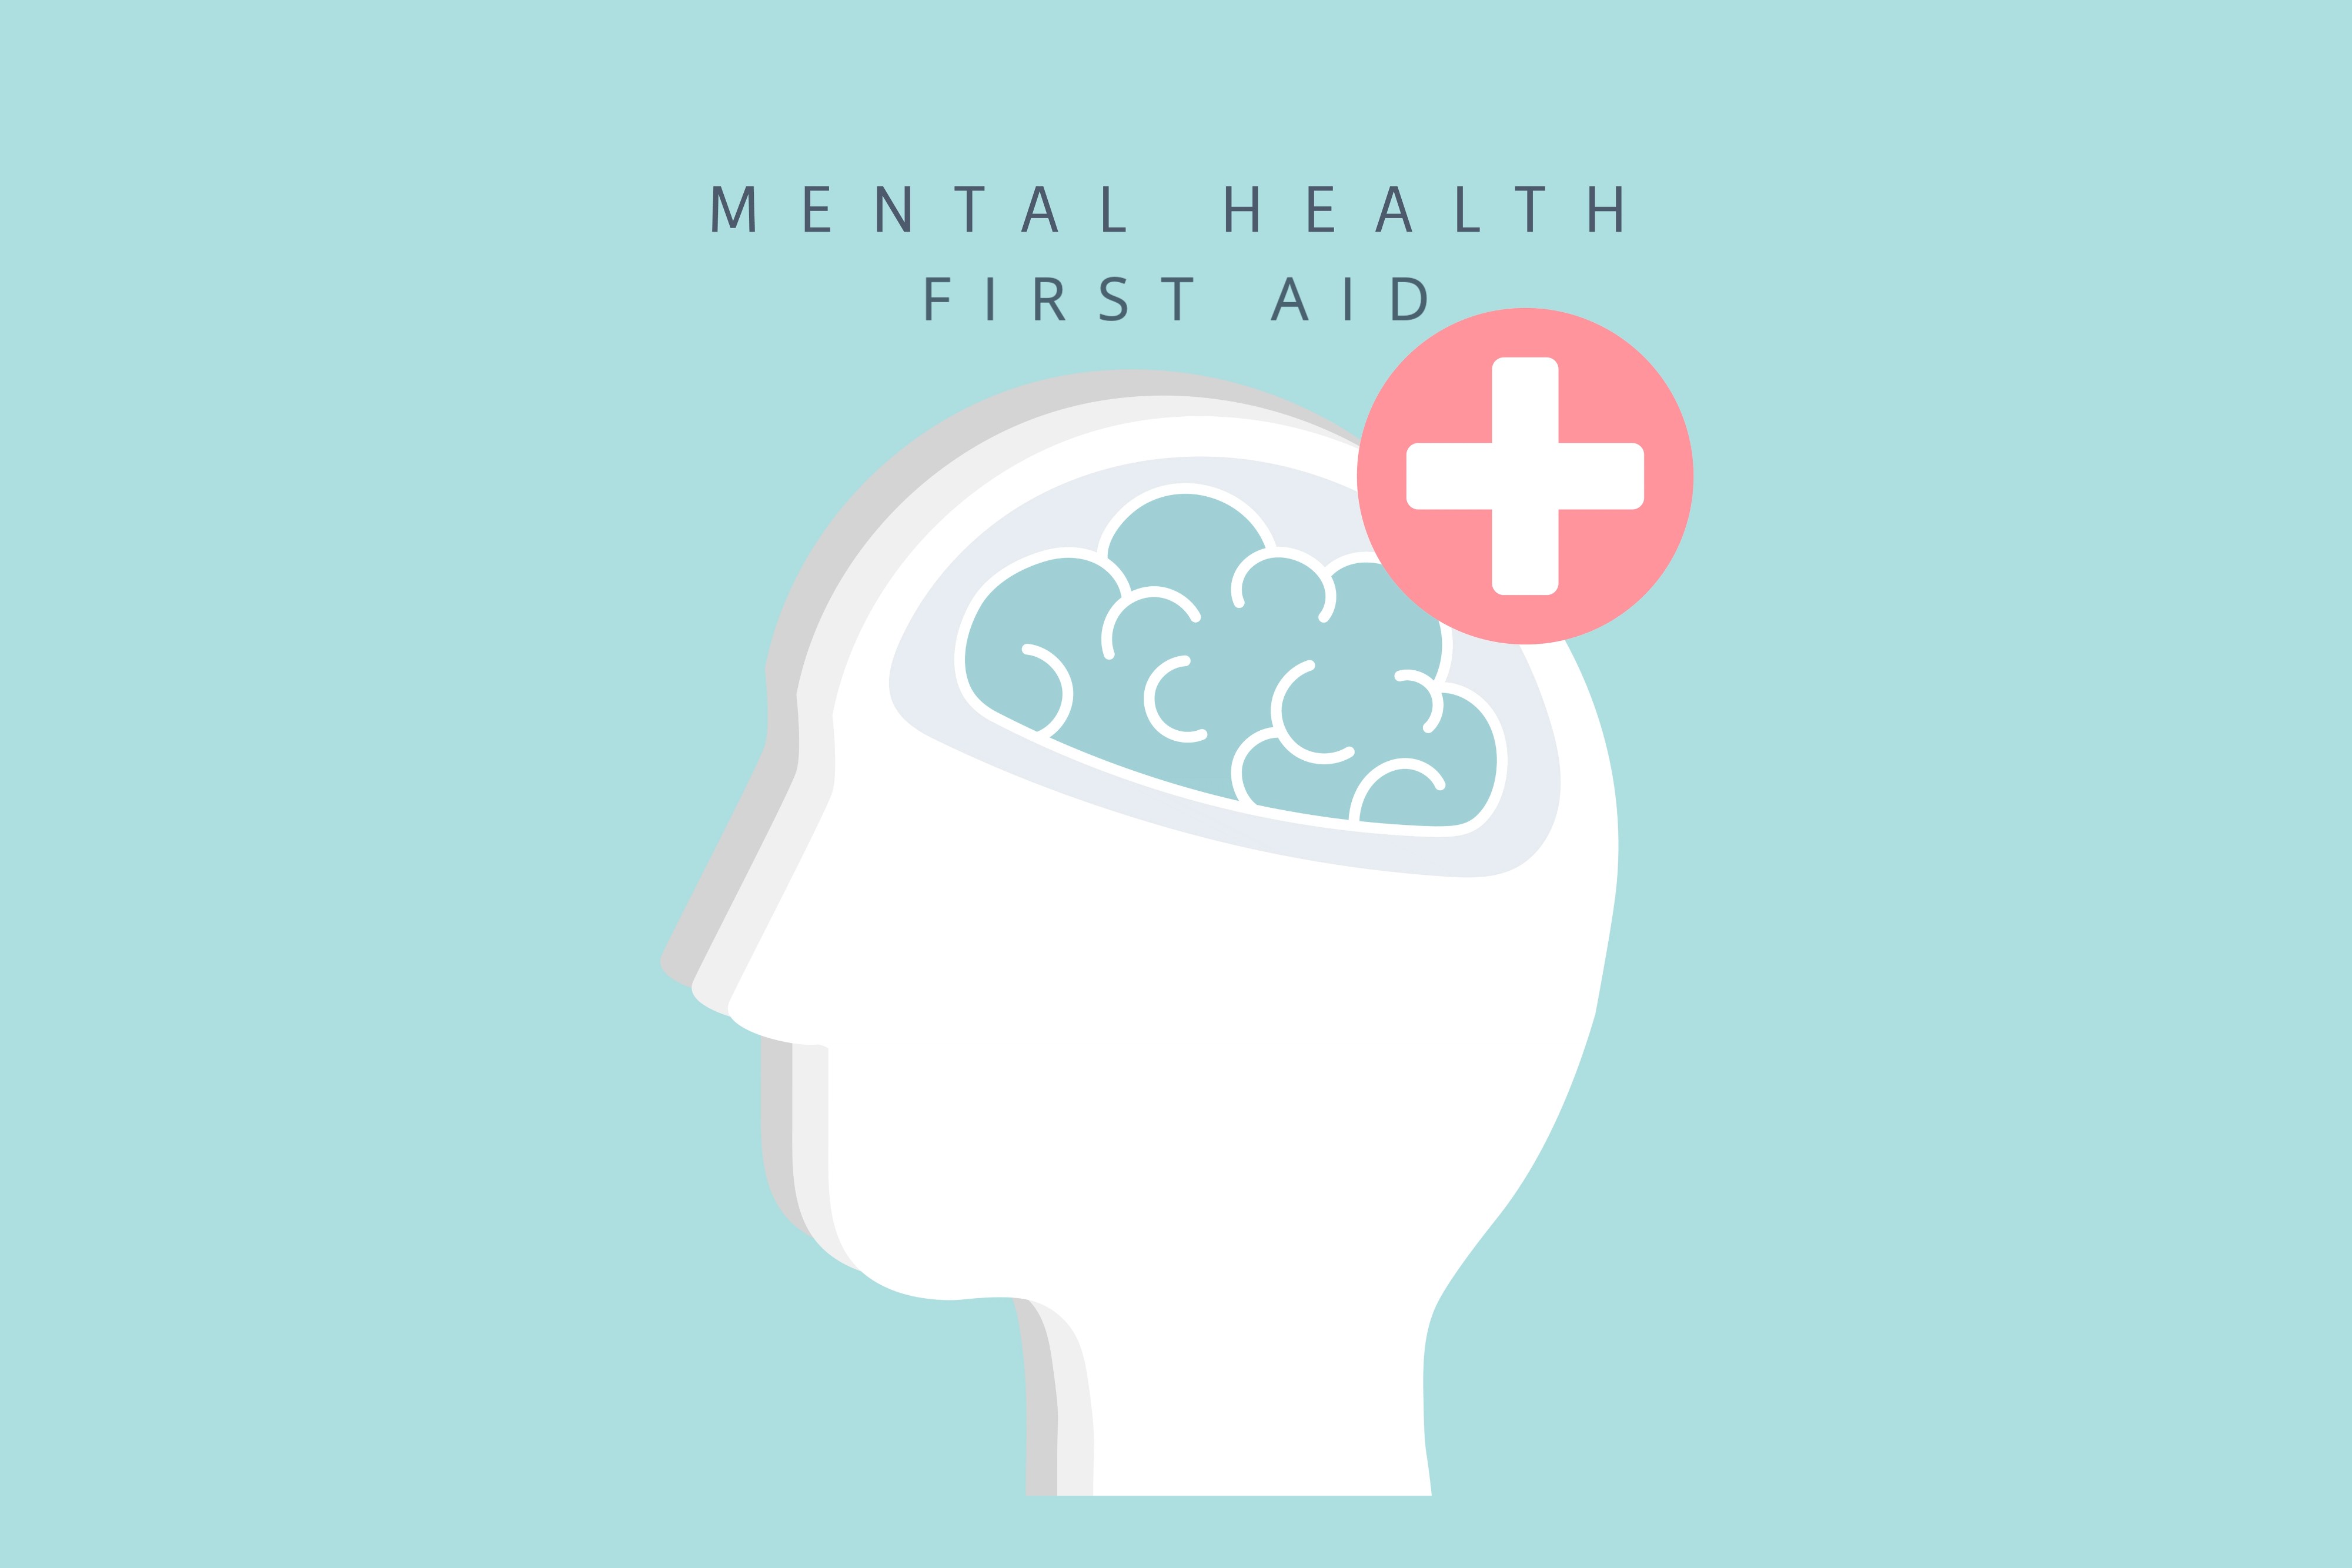 Mental Health First Aid Blended Face-to-Face Course Sydney